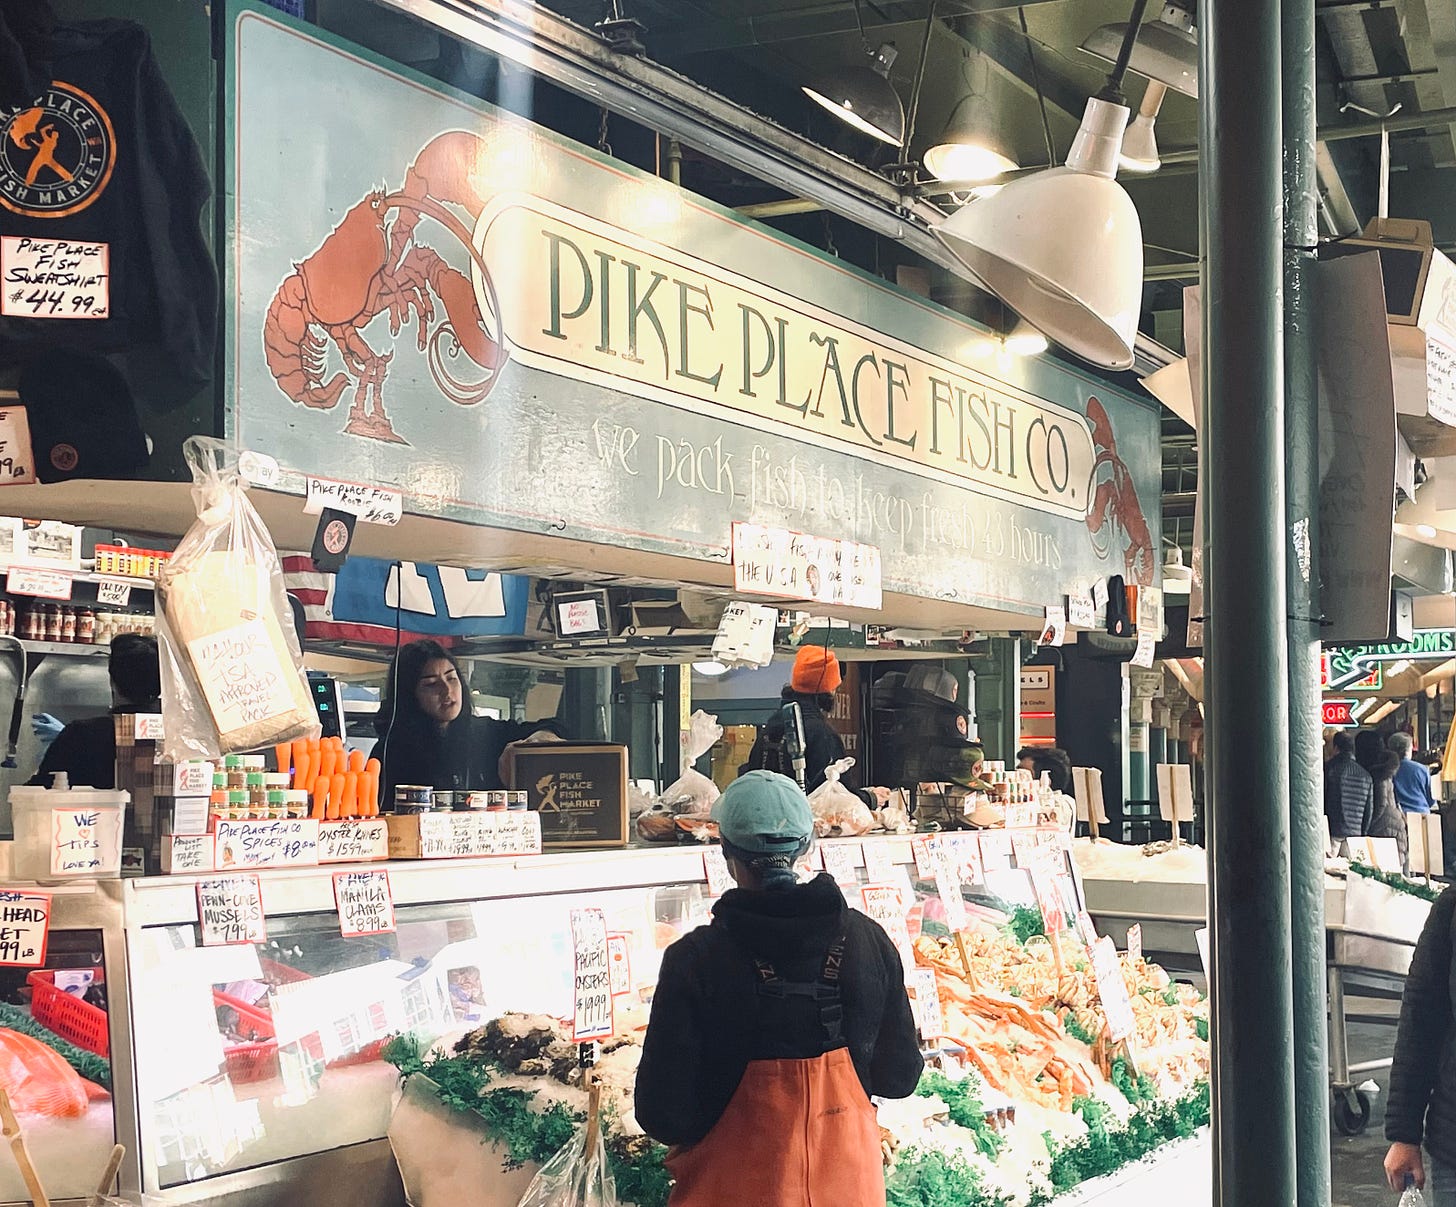 Photo of Pike Place Fish Company market stall